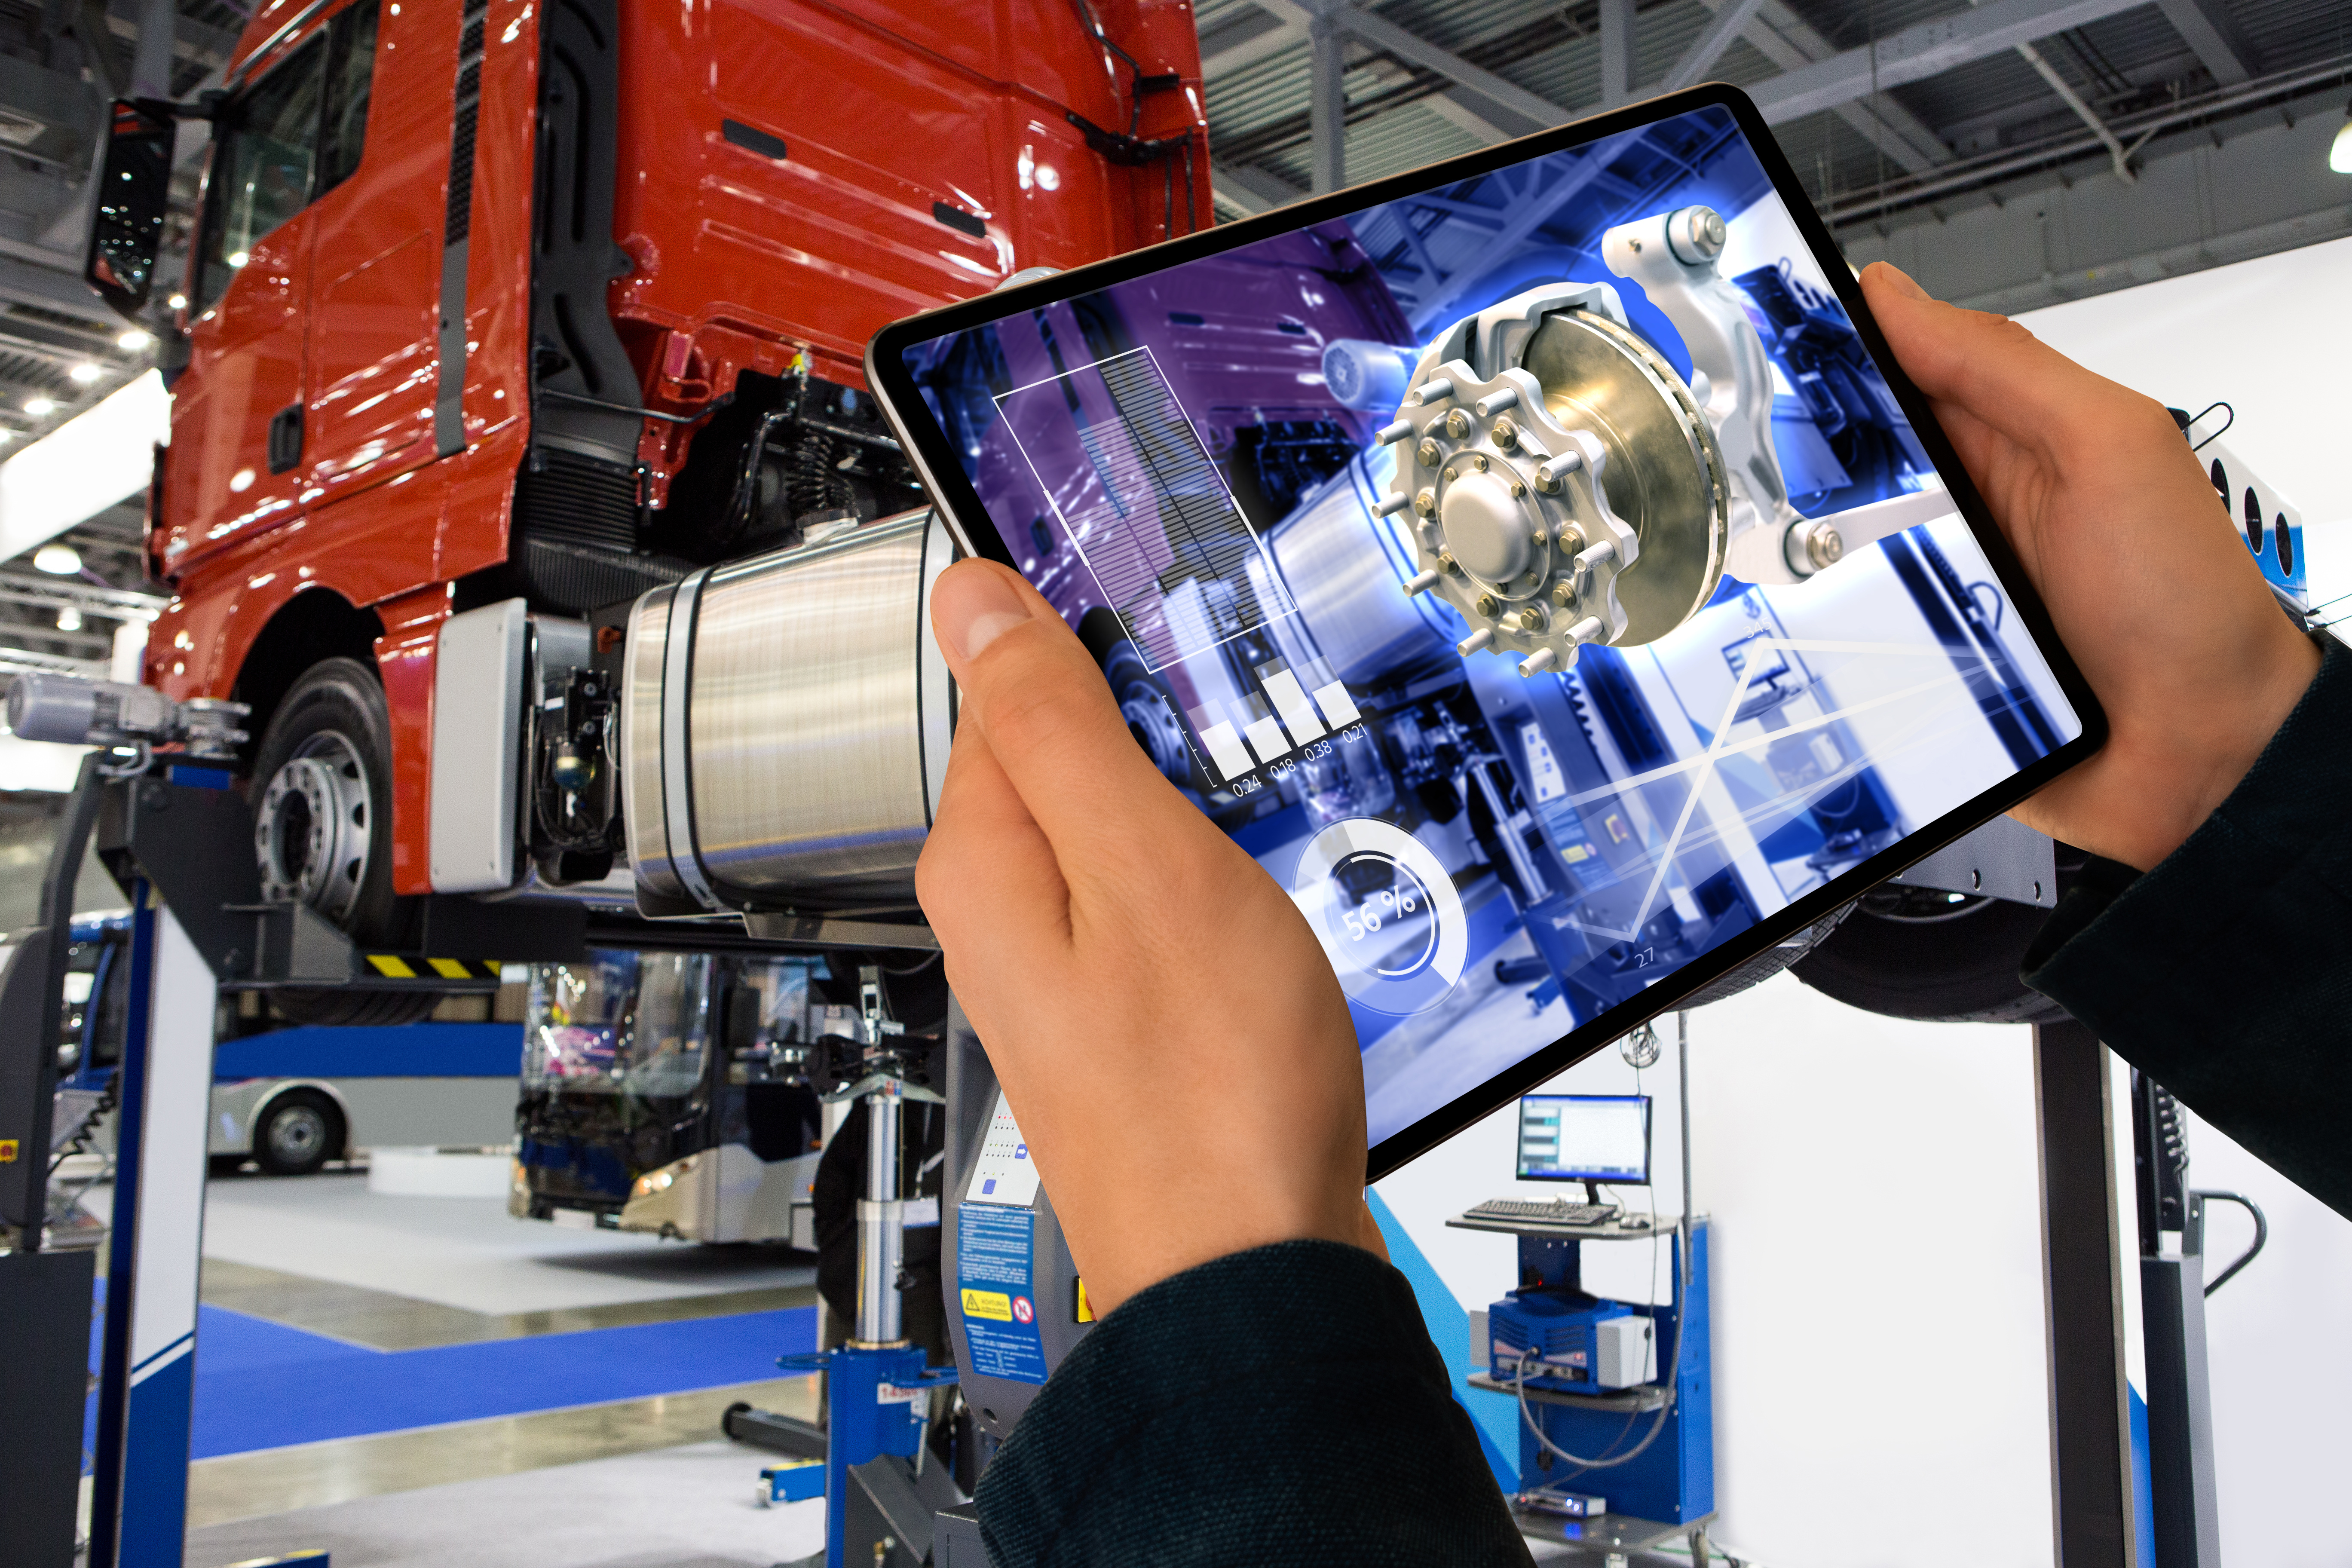 AR makes visible what cannot be seen at first glance.  Such applications can be used, for example, to train technicians in automotive mechatronics.  Photo: © sharpness86/123RF.com